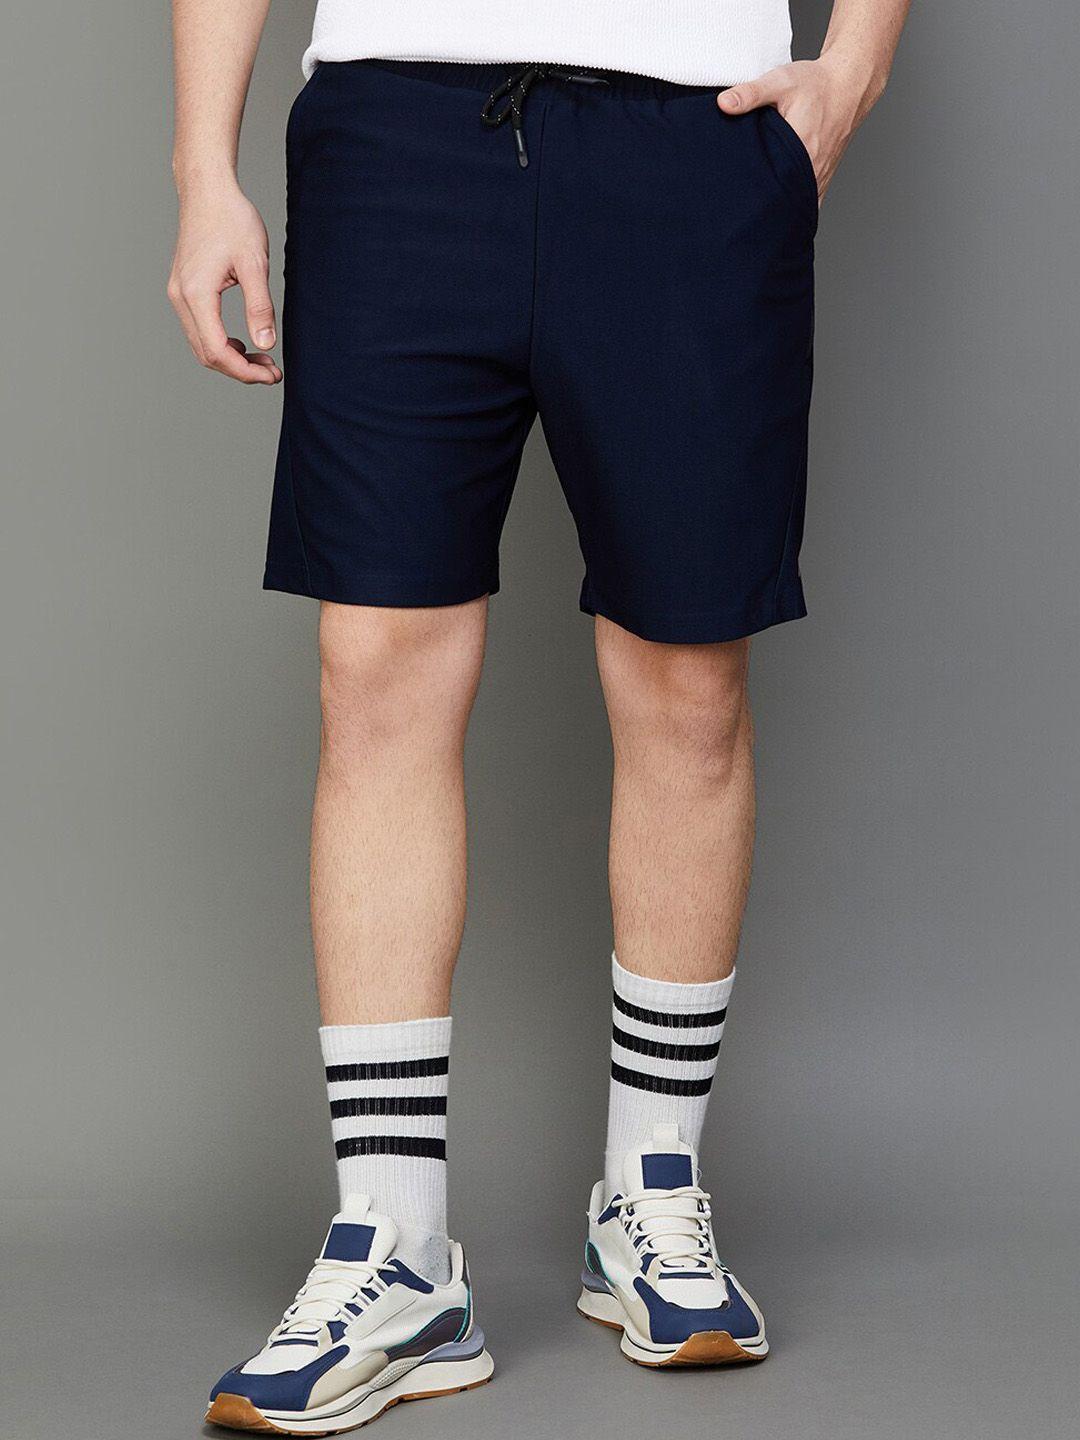 fame-forever-by-lifestyle-men-mid-rise-shorts